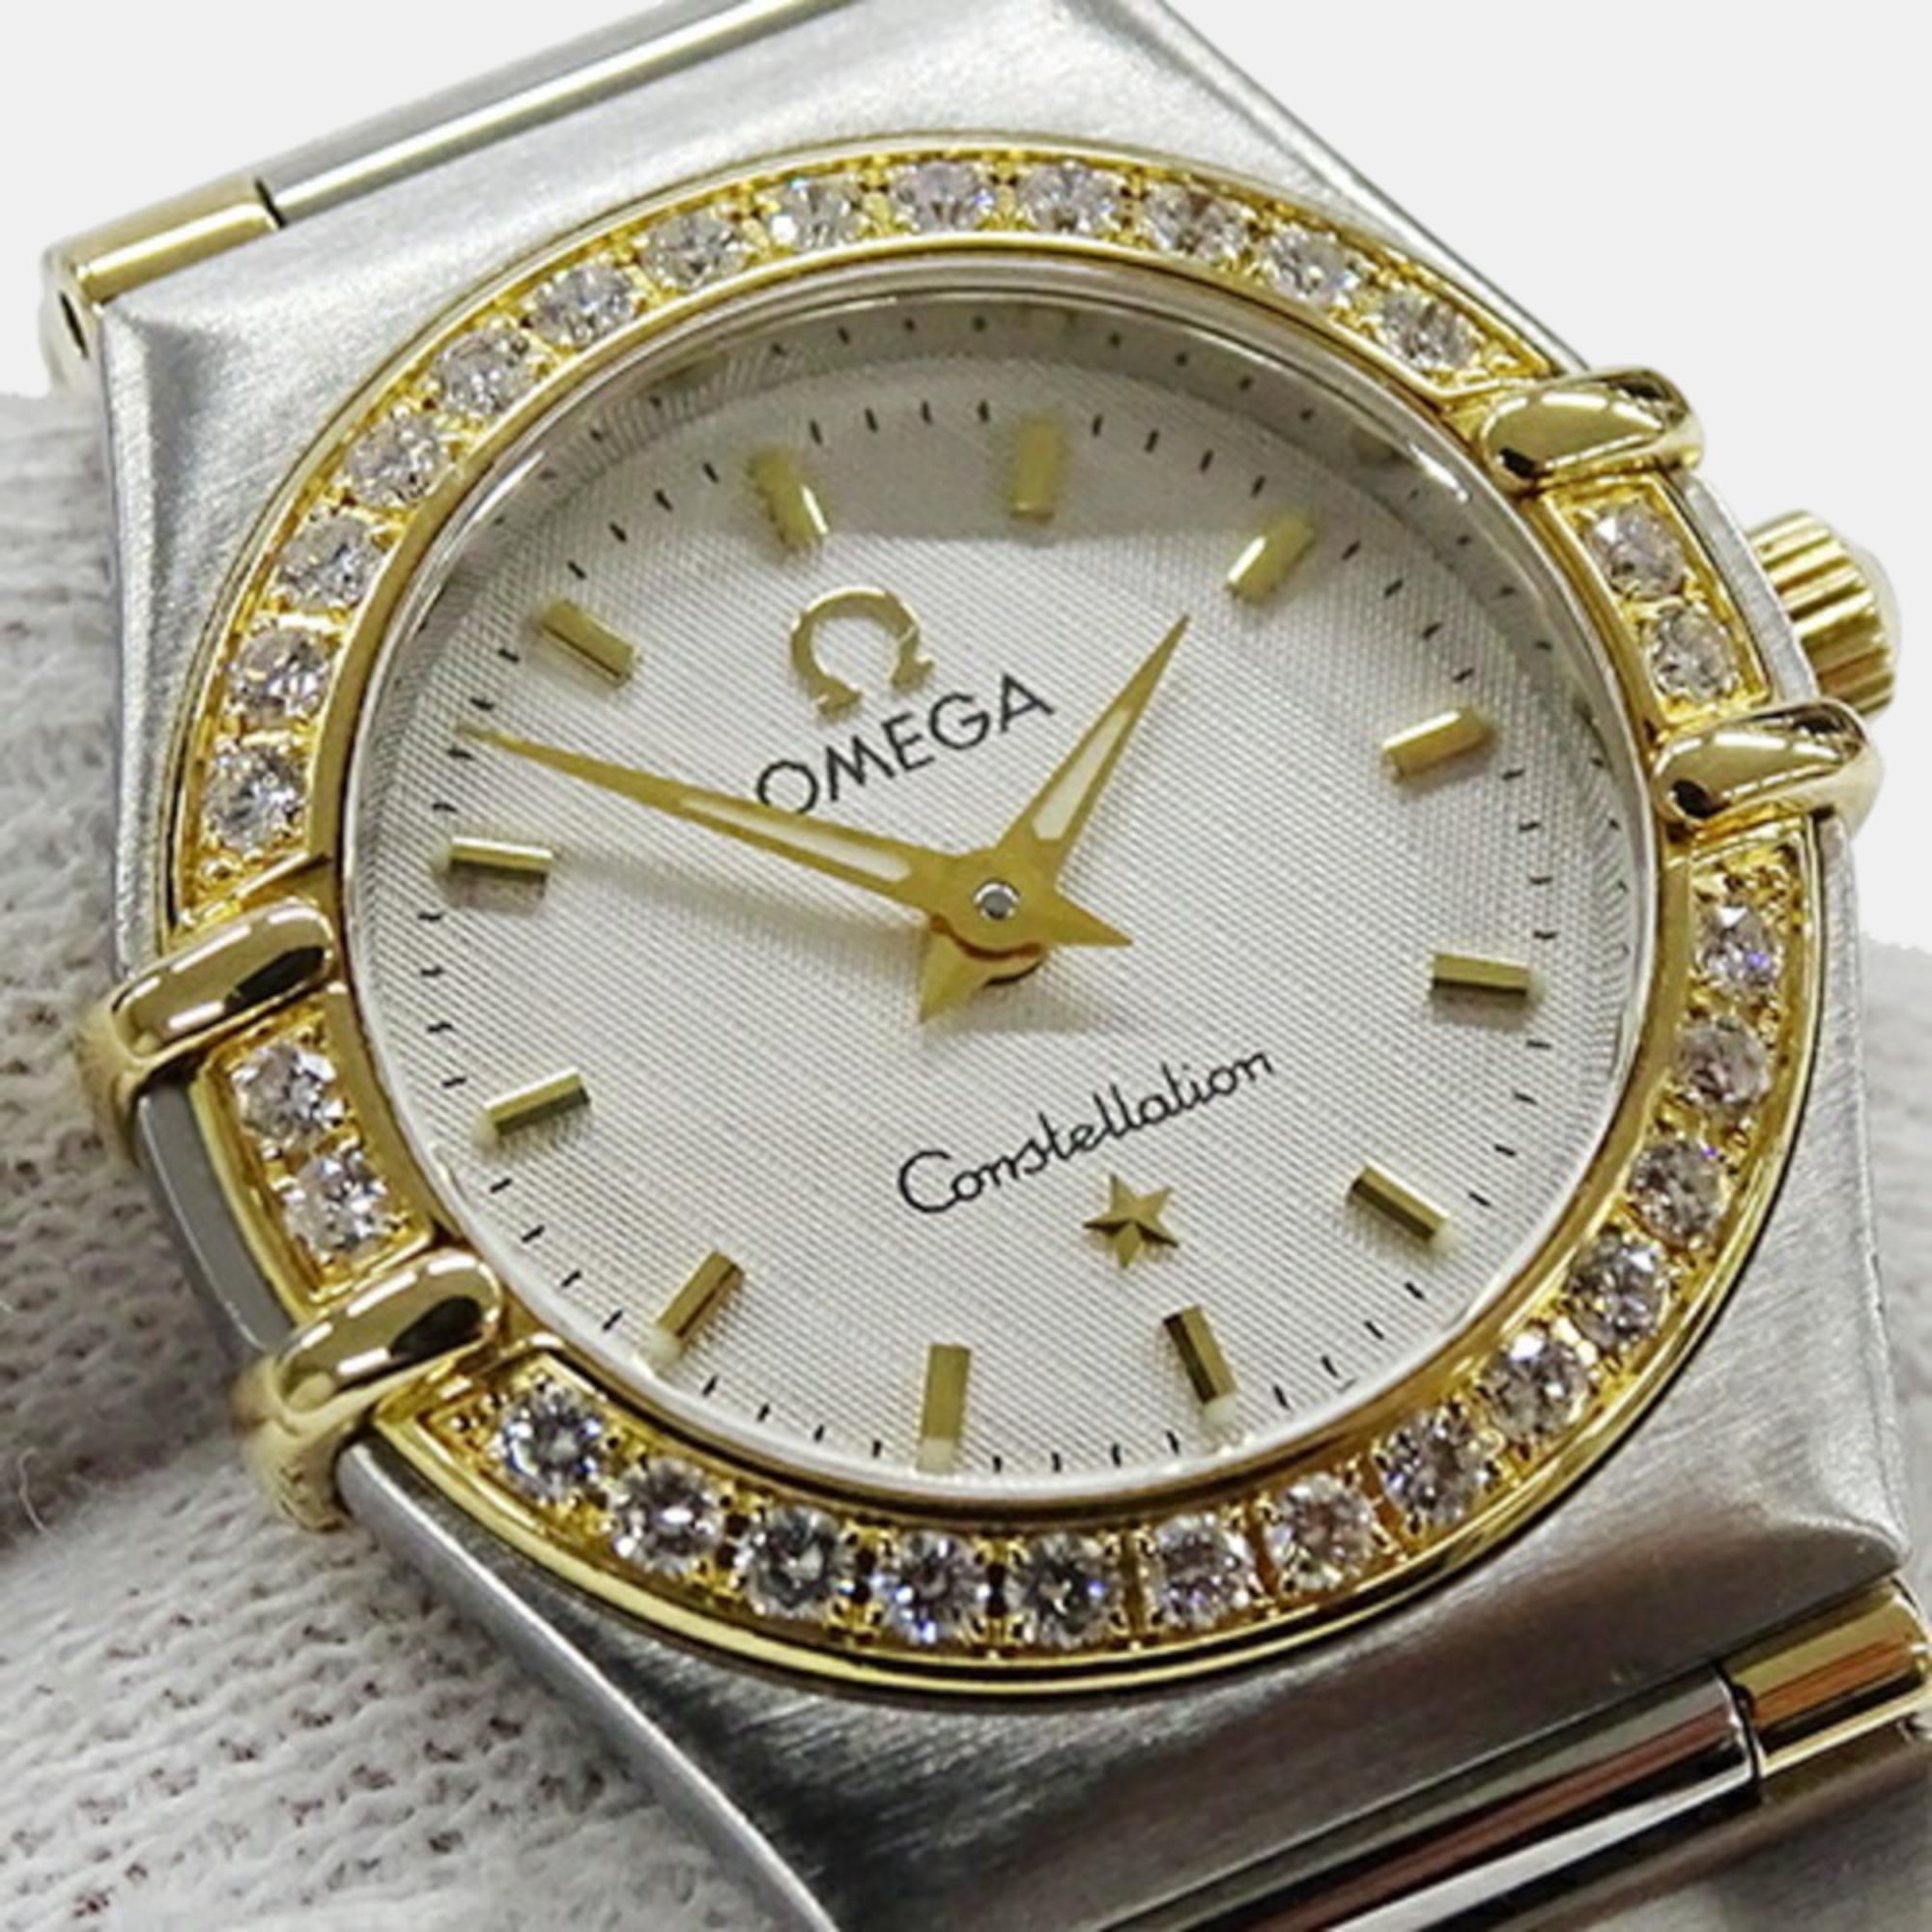 Omega White 18k Yellow Gold And Stainless Steel Constellation 1267.30 Quartz Women's Wristwatch 23 Mm